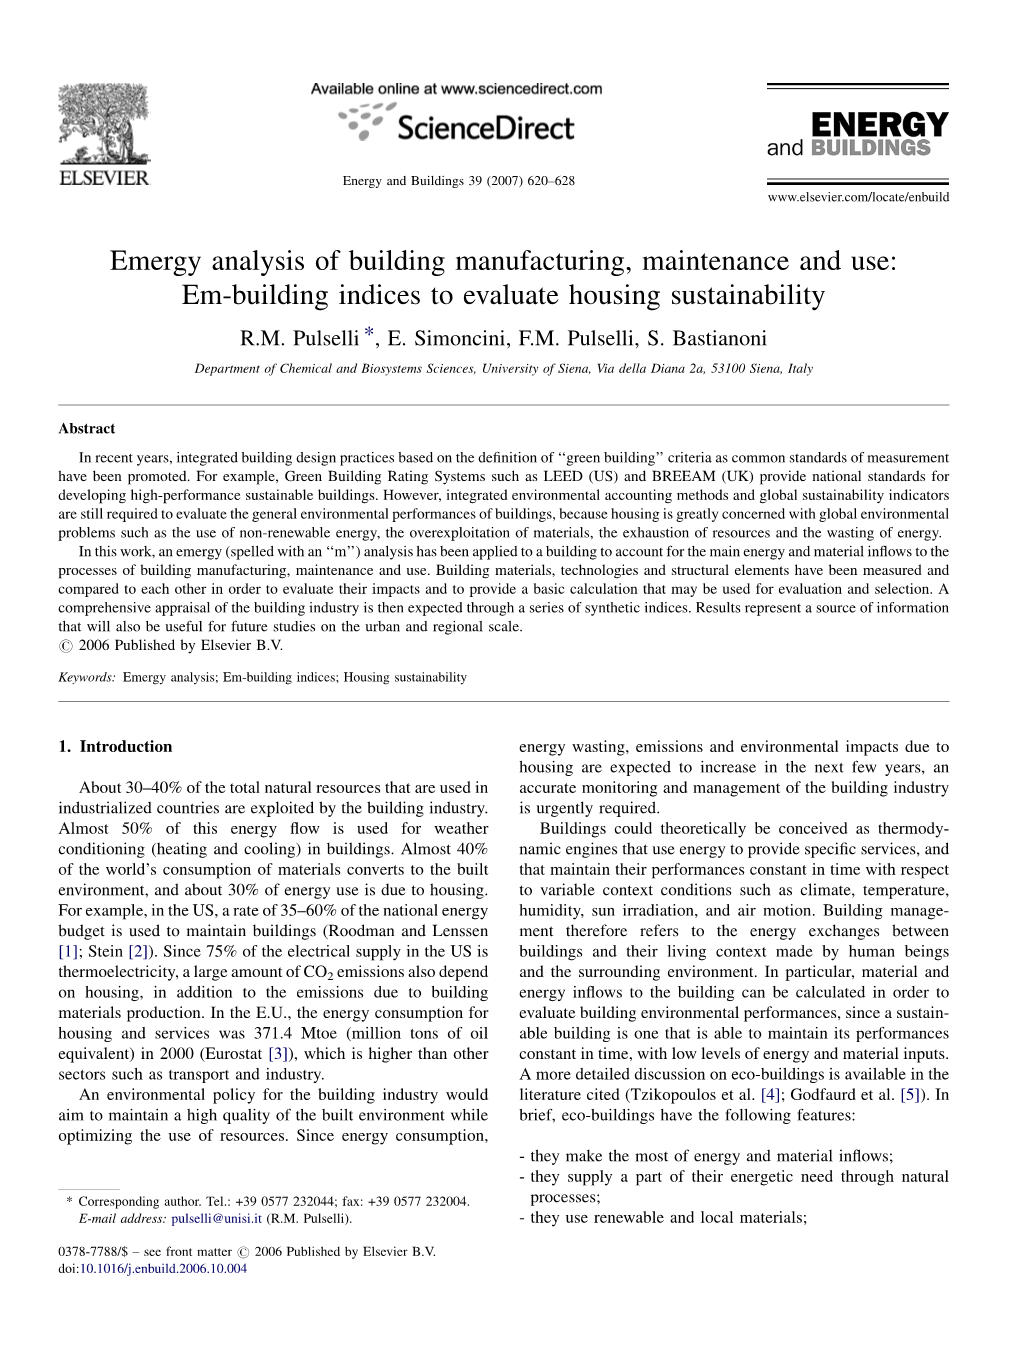 Emergy Analysis of Building Manufacturing, Maintenance and Use: Em-Building Indices to Evaluate Housing Sustainability R.M